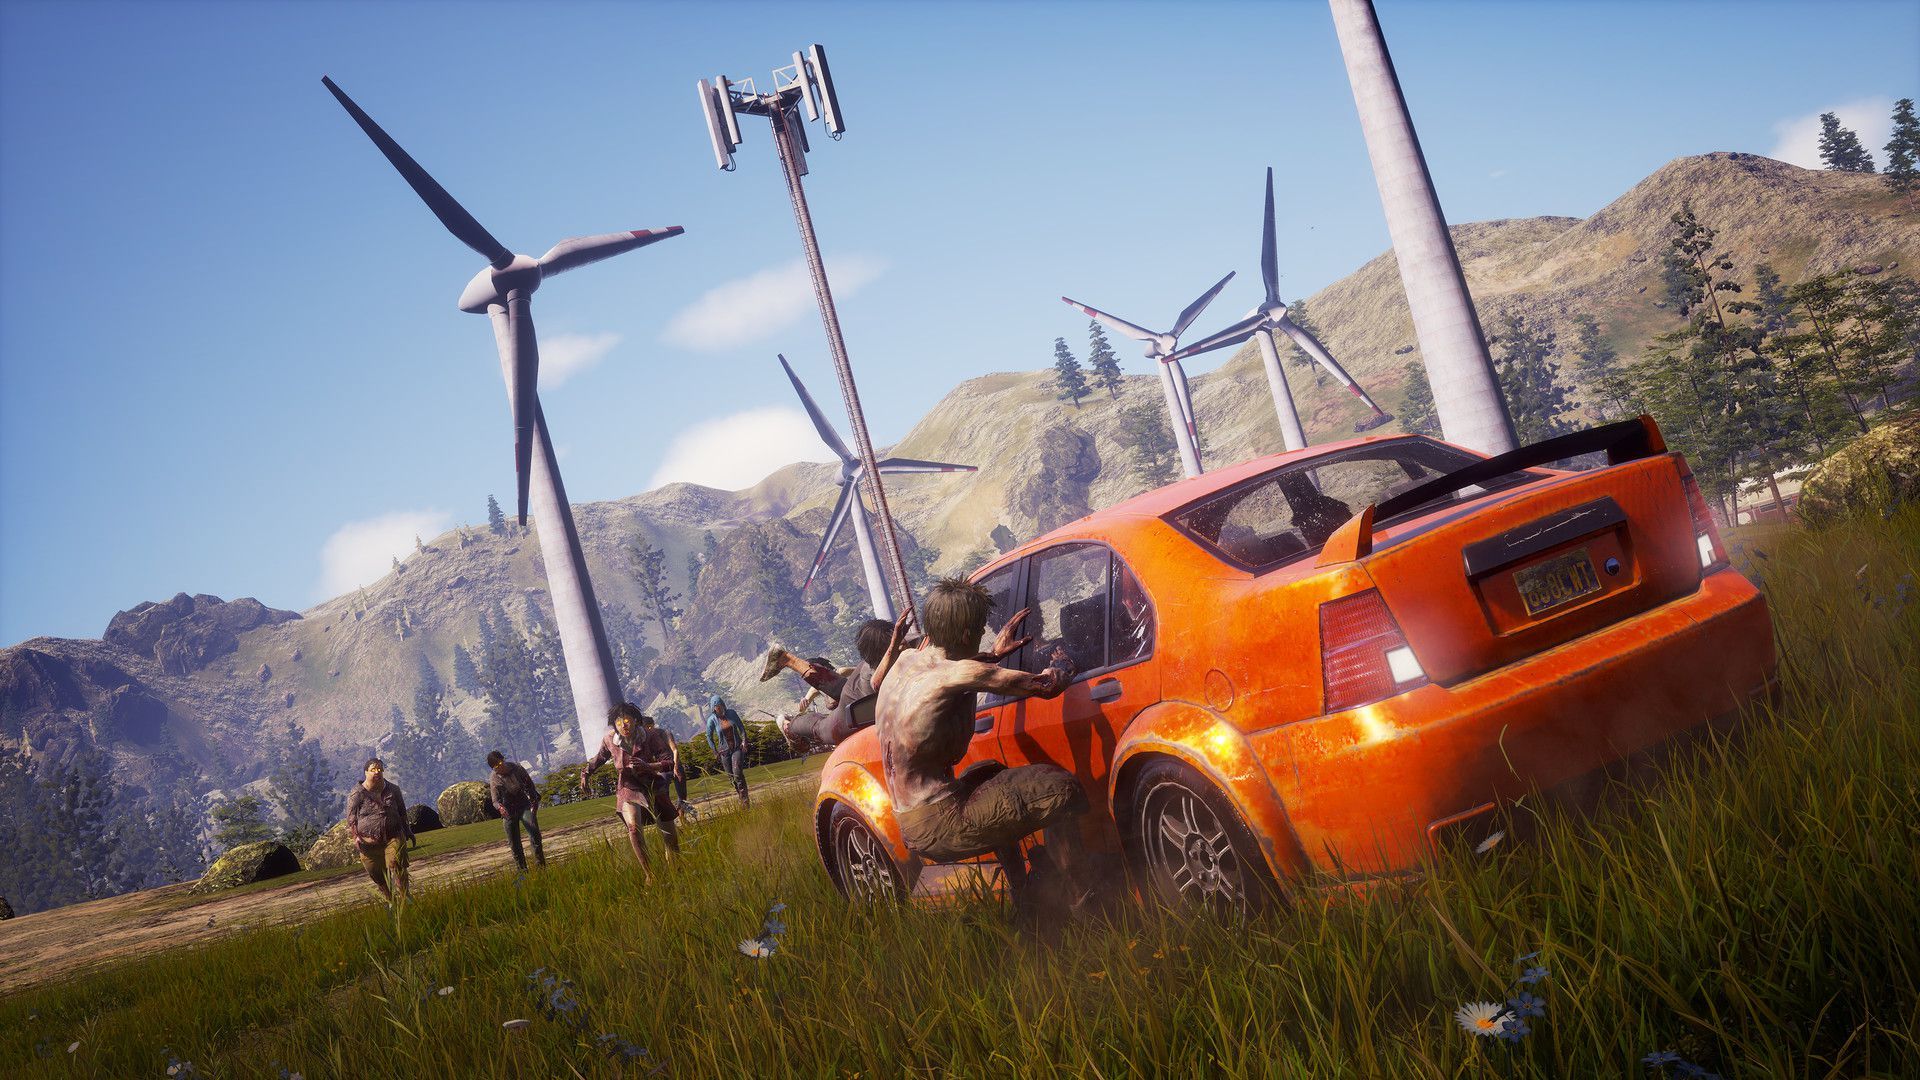 An animated man squats near an orange car in a field with windmills 